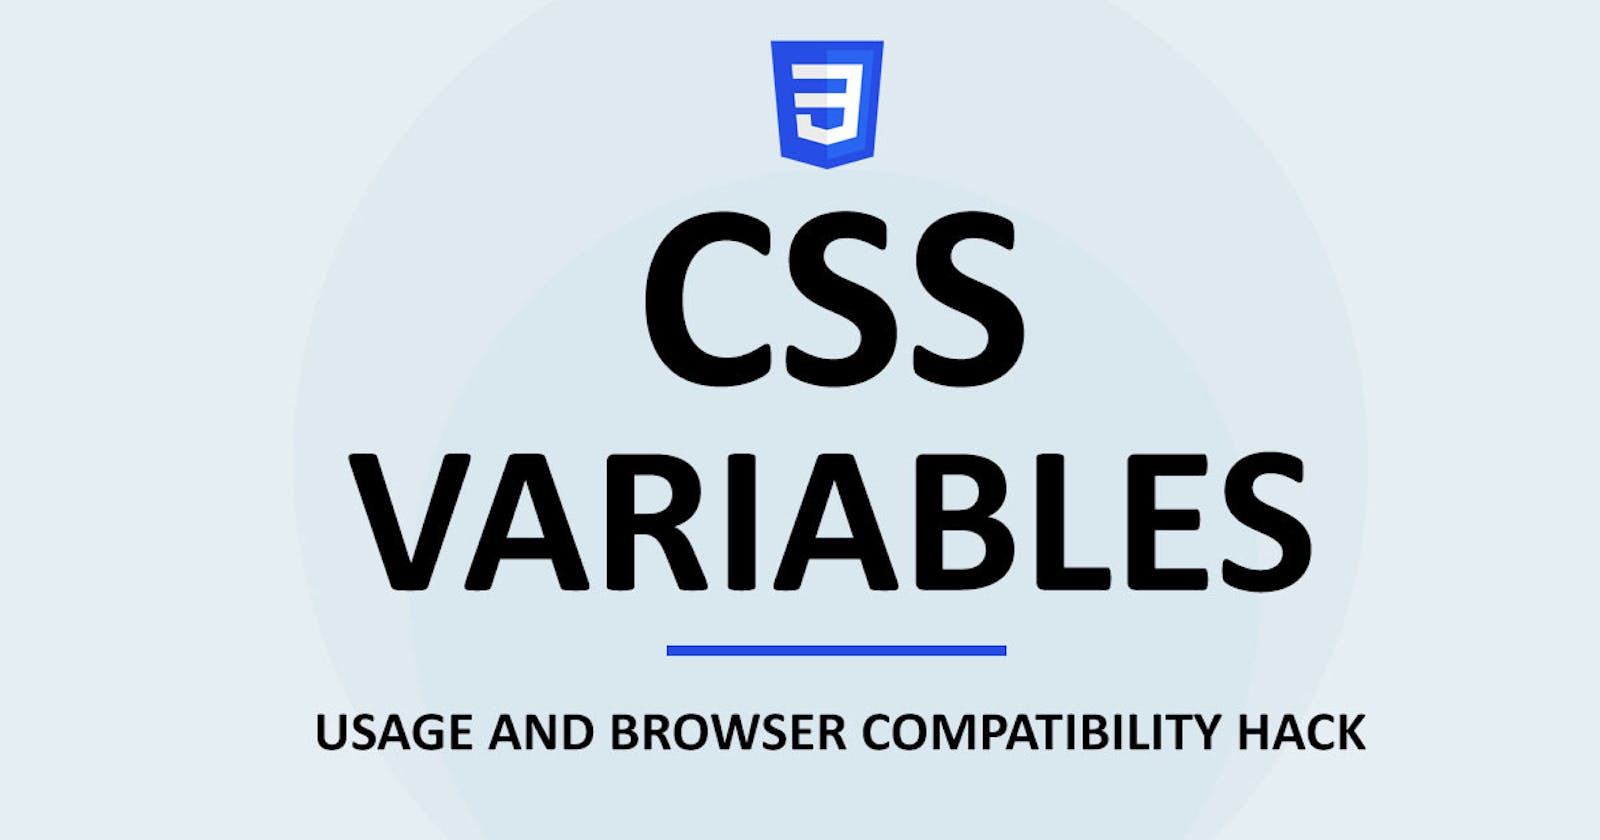 CSS VARIABLES: USAGE AND BROWSER COMPATIBILITY HACK